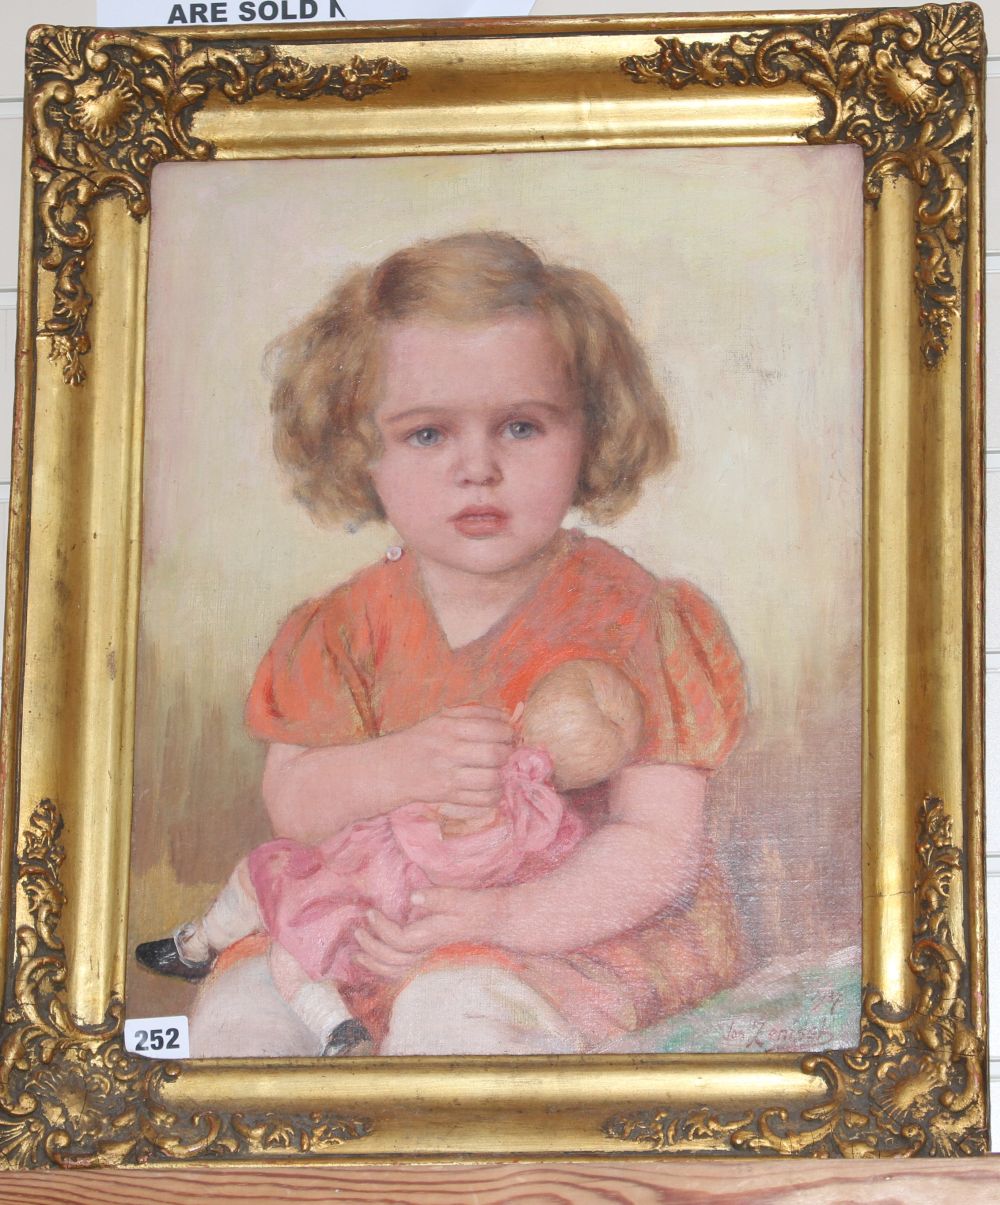 Josef Zenisek (1855-1944), oil on canvas, Portrait of a child holding a doll, signed and dated 1937, 45 x 35cm